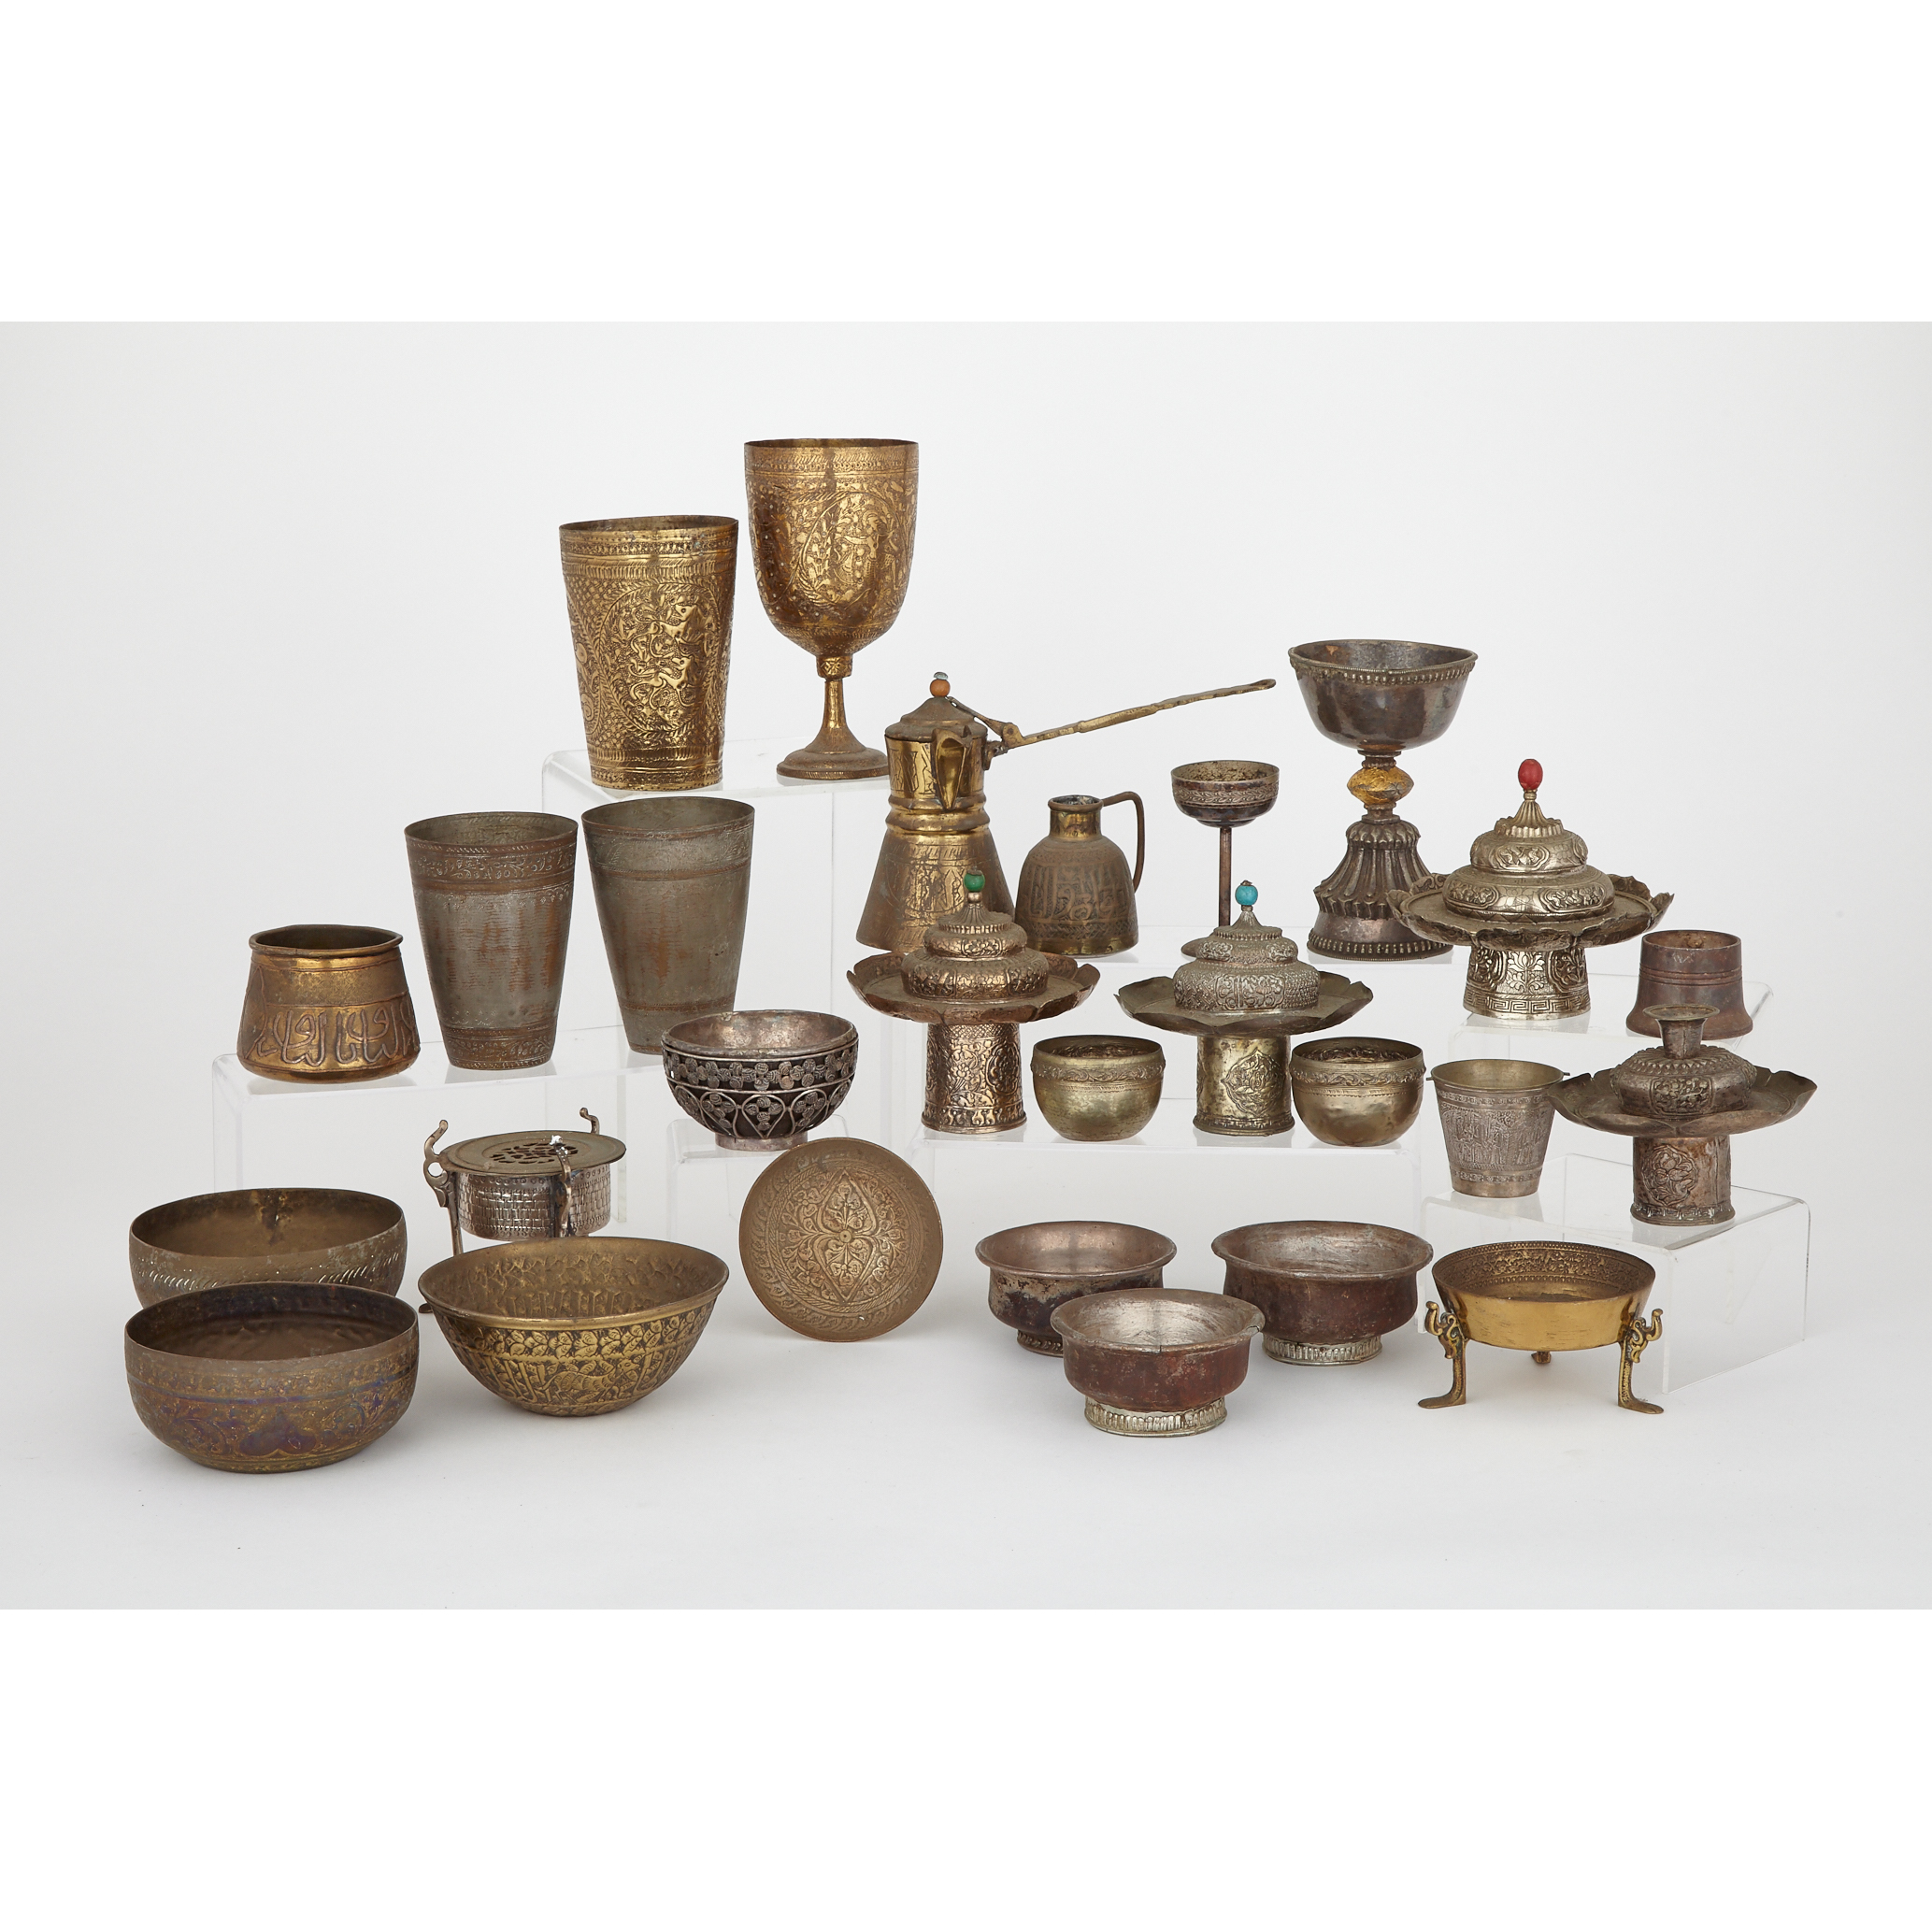 A Group of Twenty-Seven Indian Bronze Vessels, 19th/20th Century